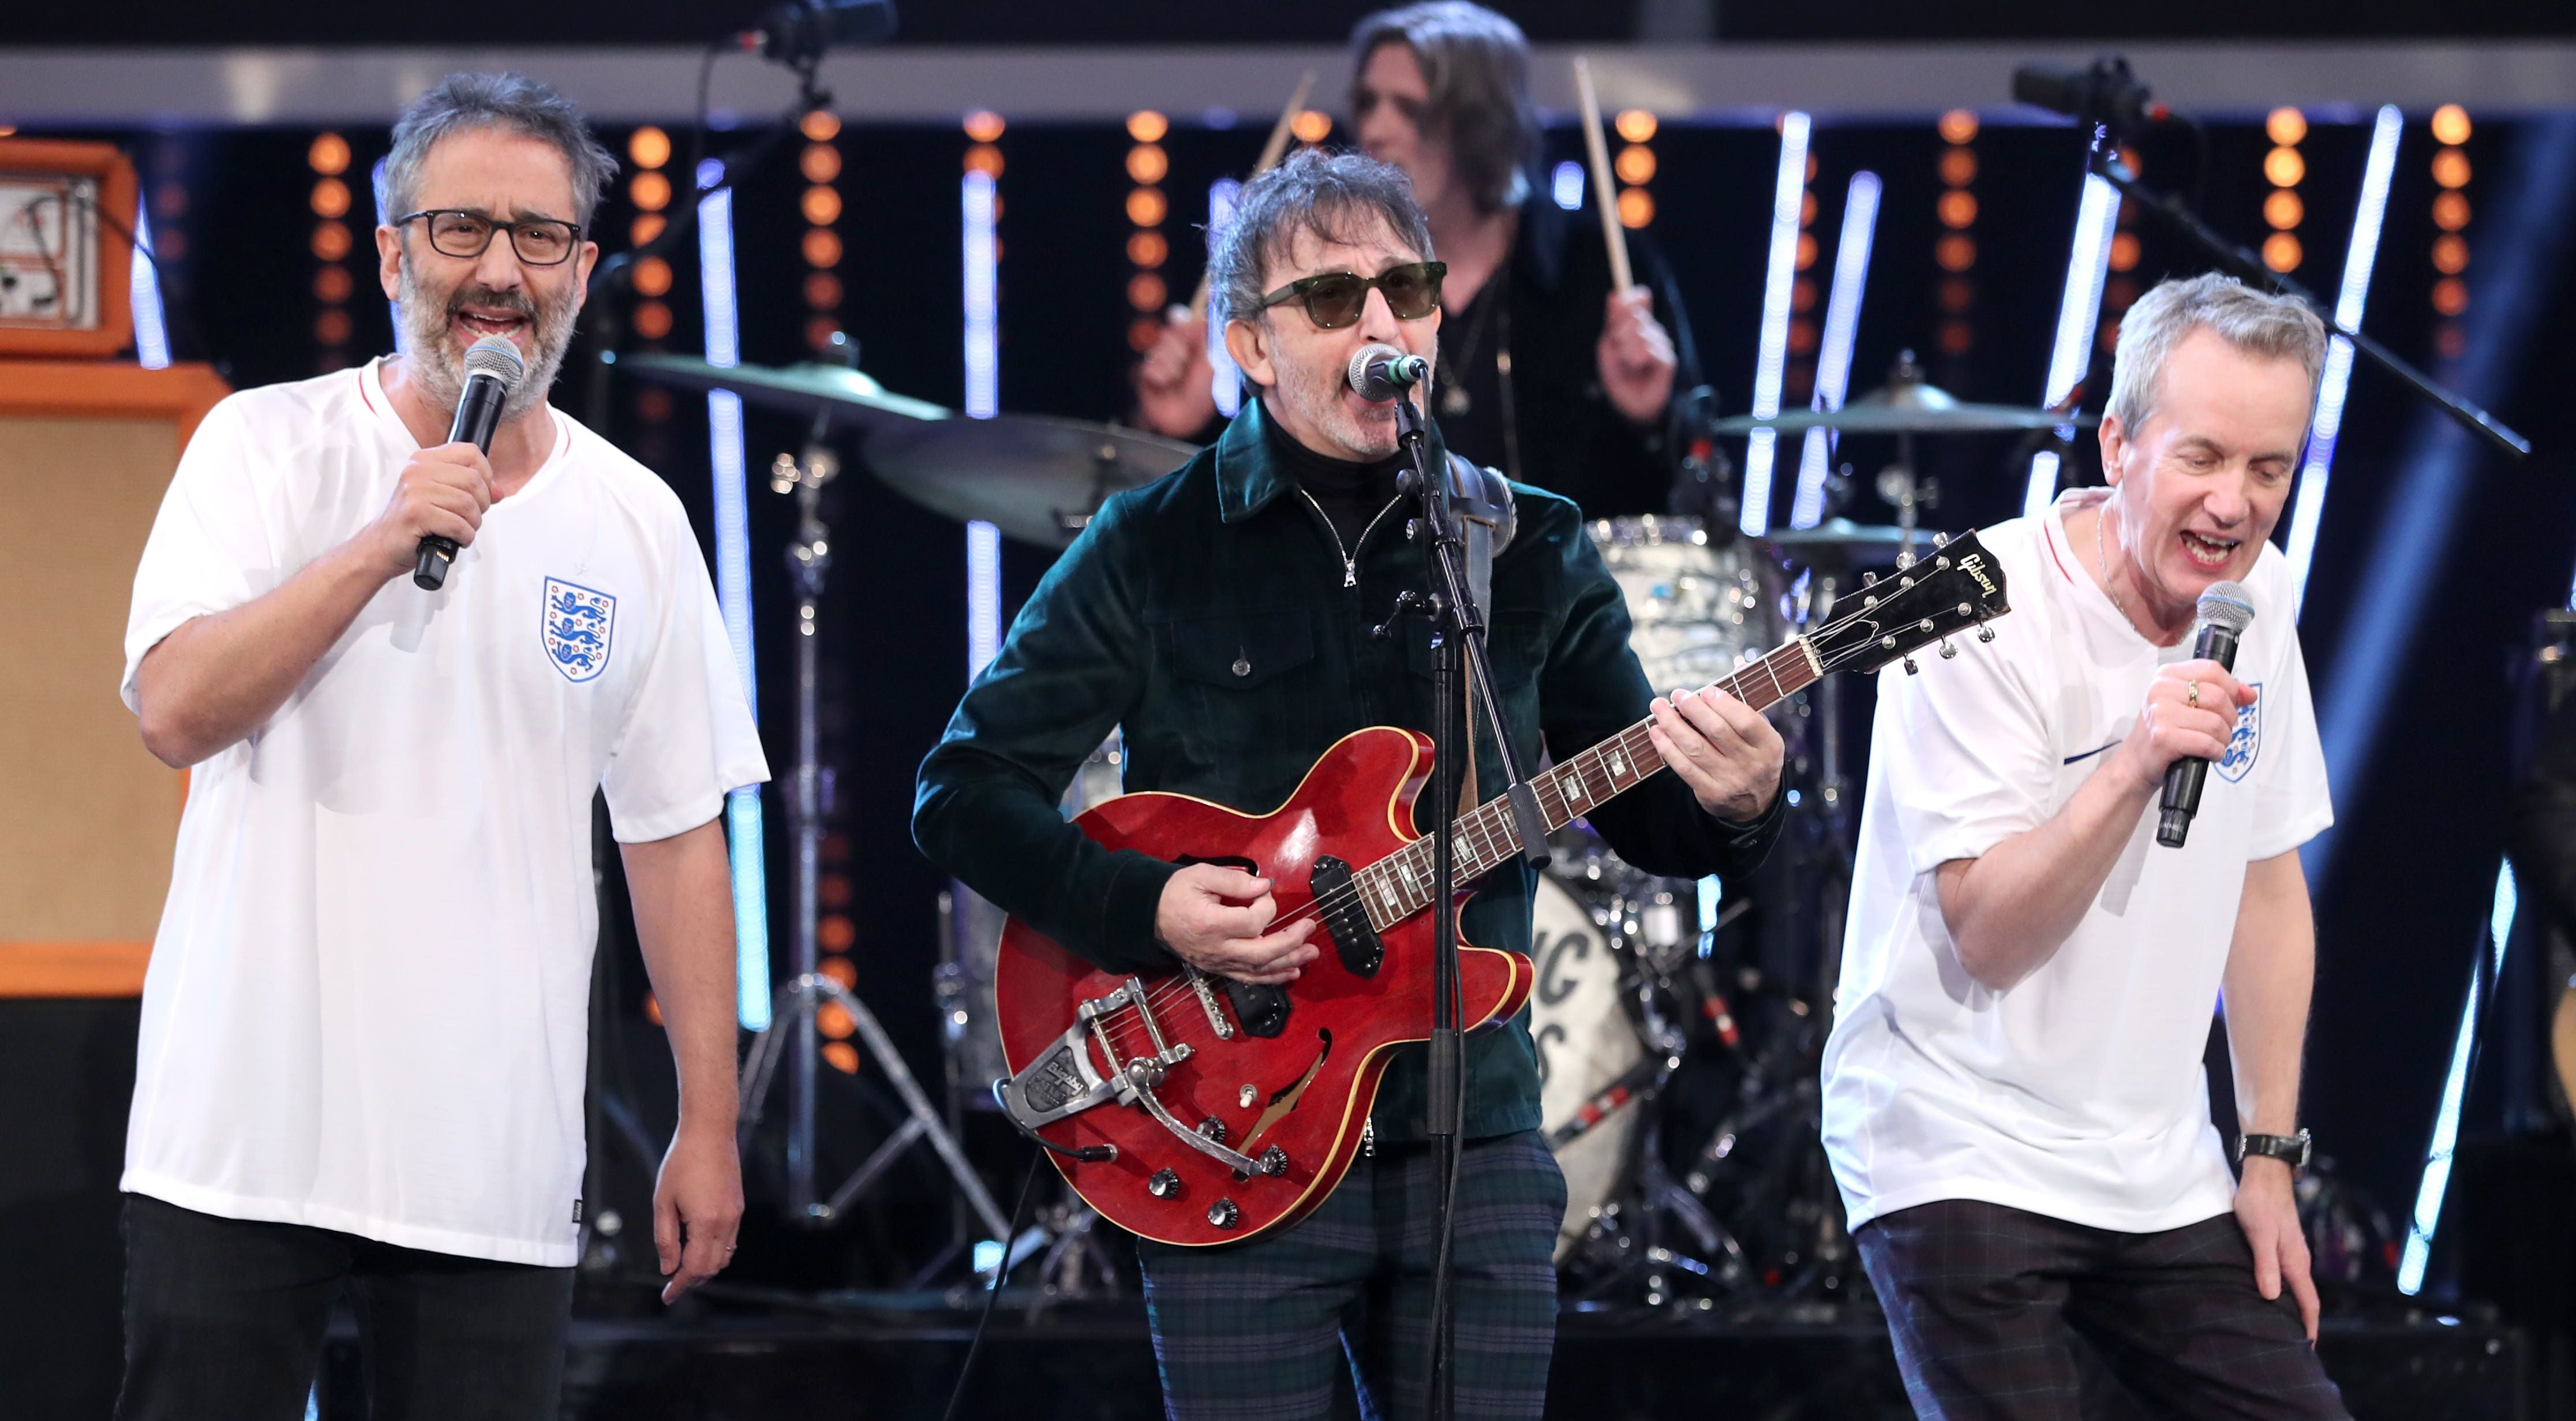 Baddiel and Skinner to perform with Lightning Seeds in London gig